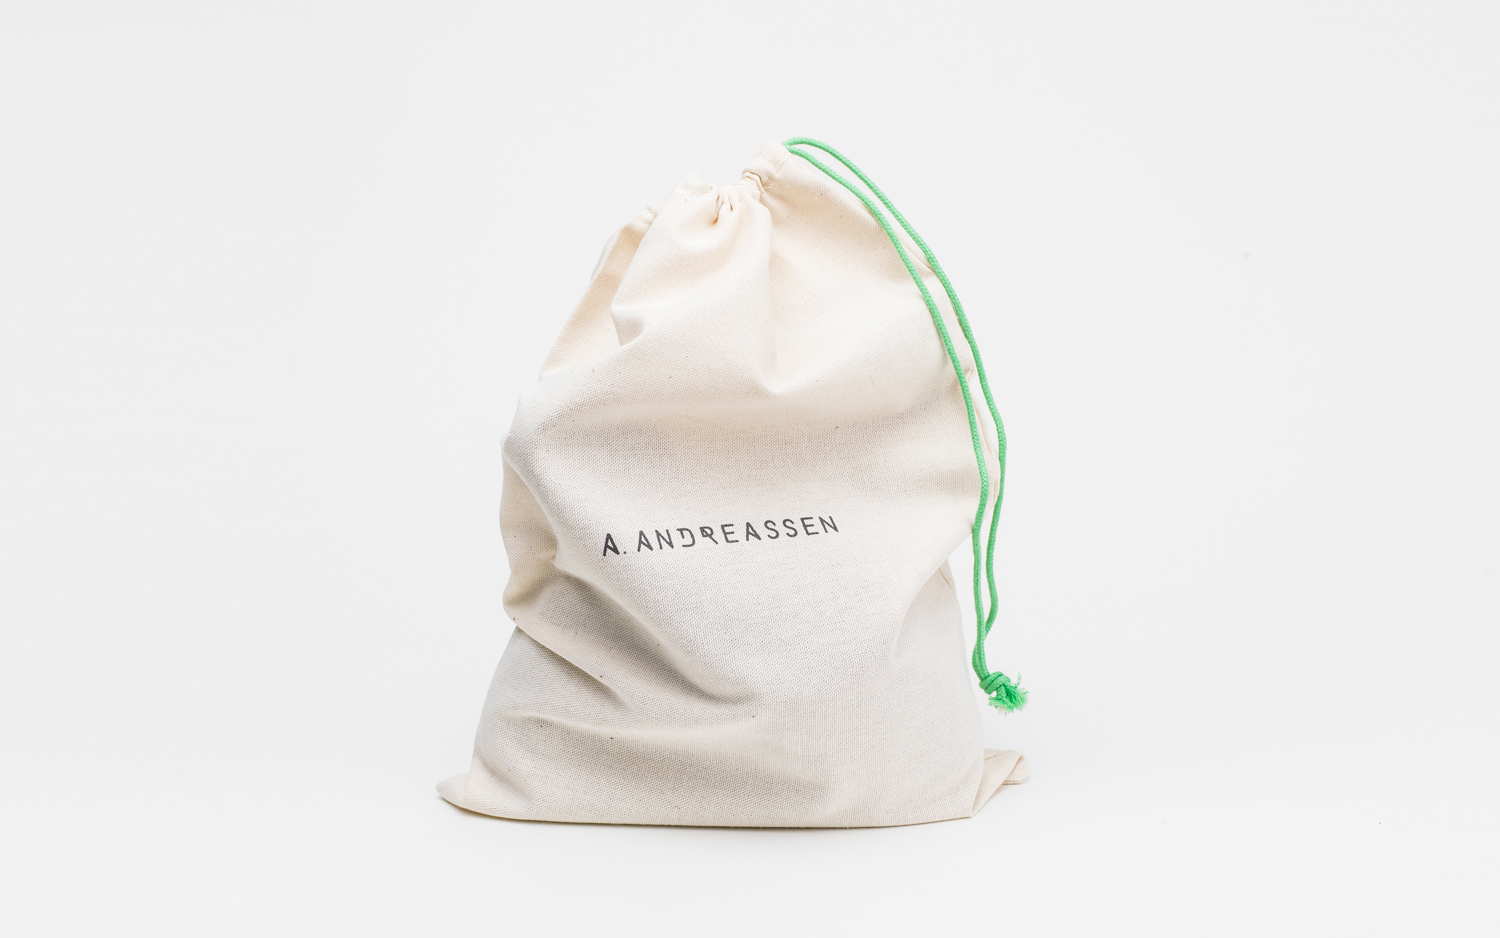 Brand identity and branded draw string bag by graphic design studio Bond for new Scandinavian lifestyle brand A. Andreassen